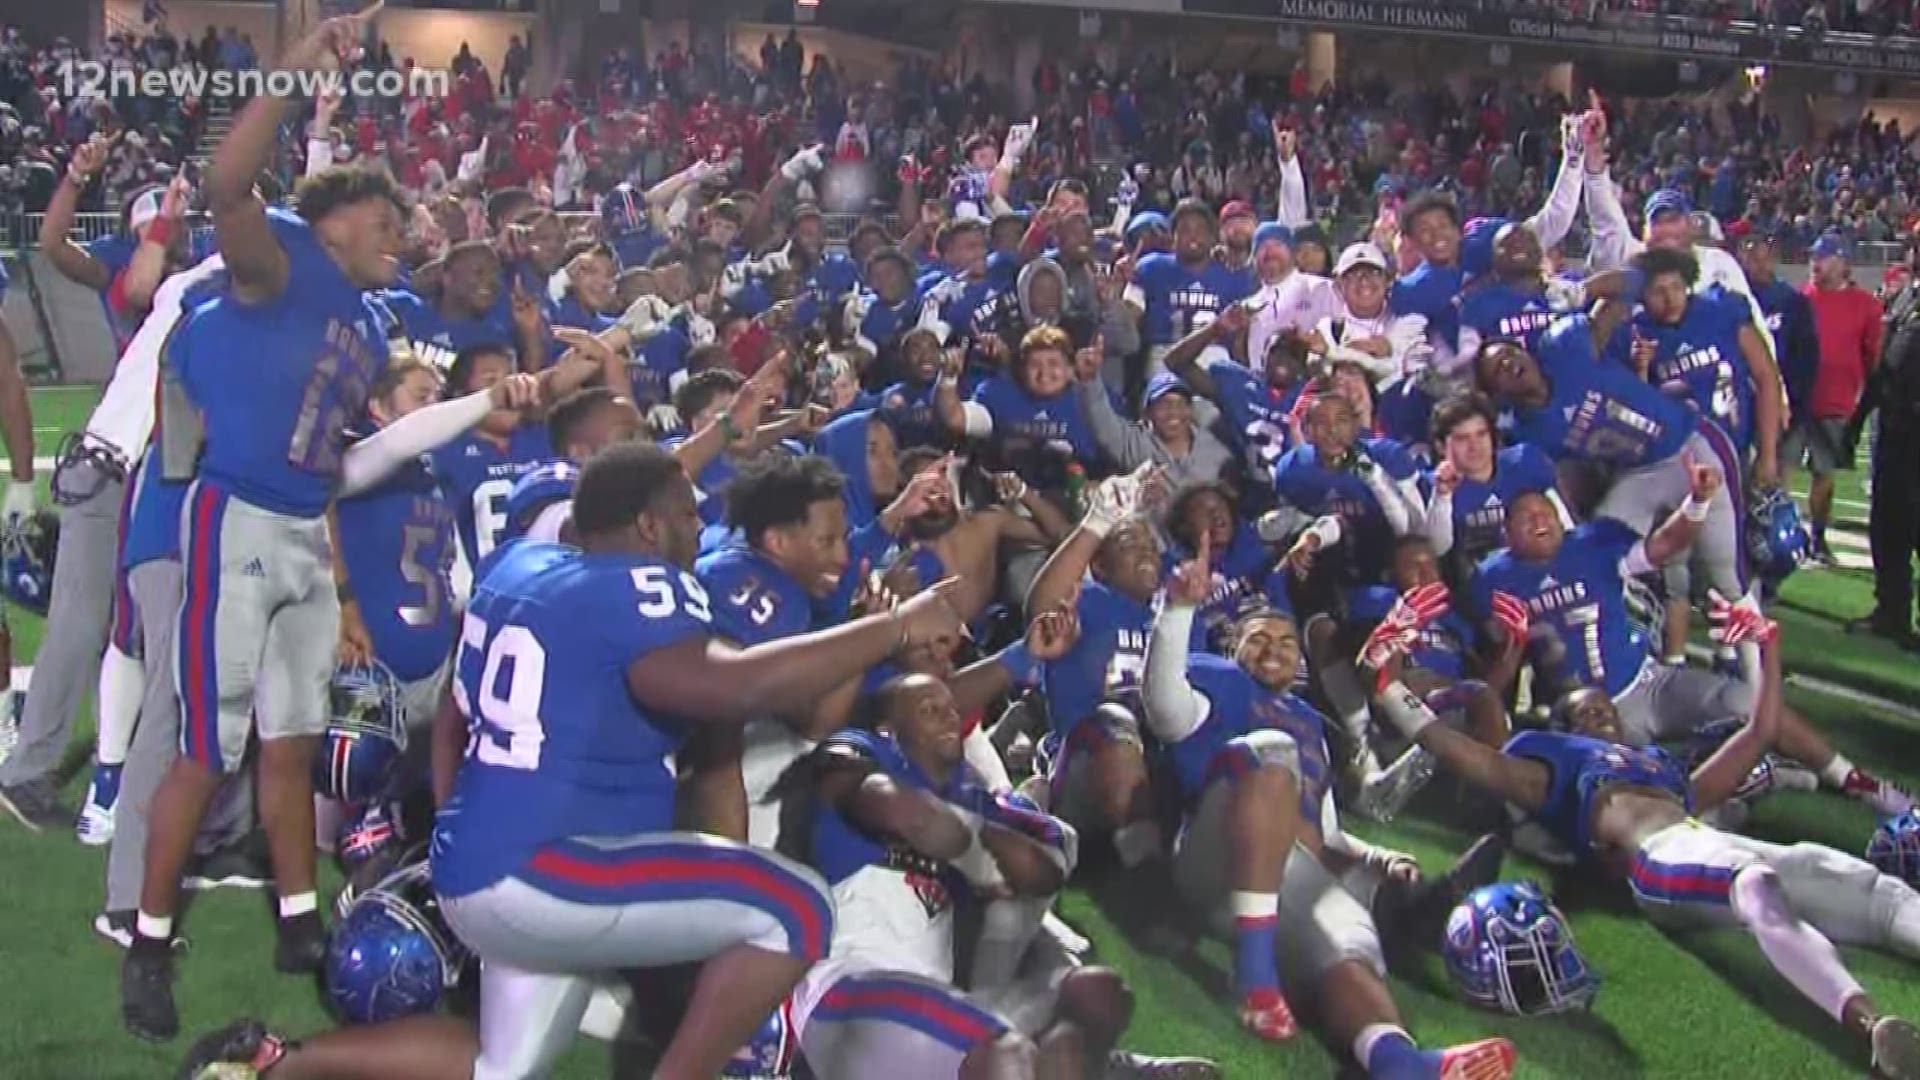 The West Brook Bruins defeat Austin Westlake 35-30 and advance to the 6A DII State Championship for the first time since 1982.